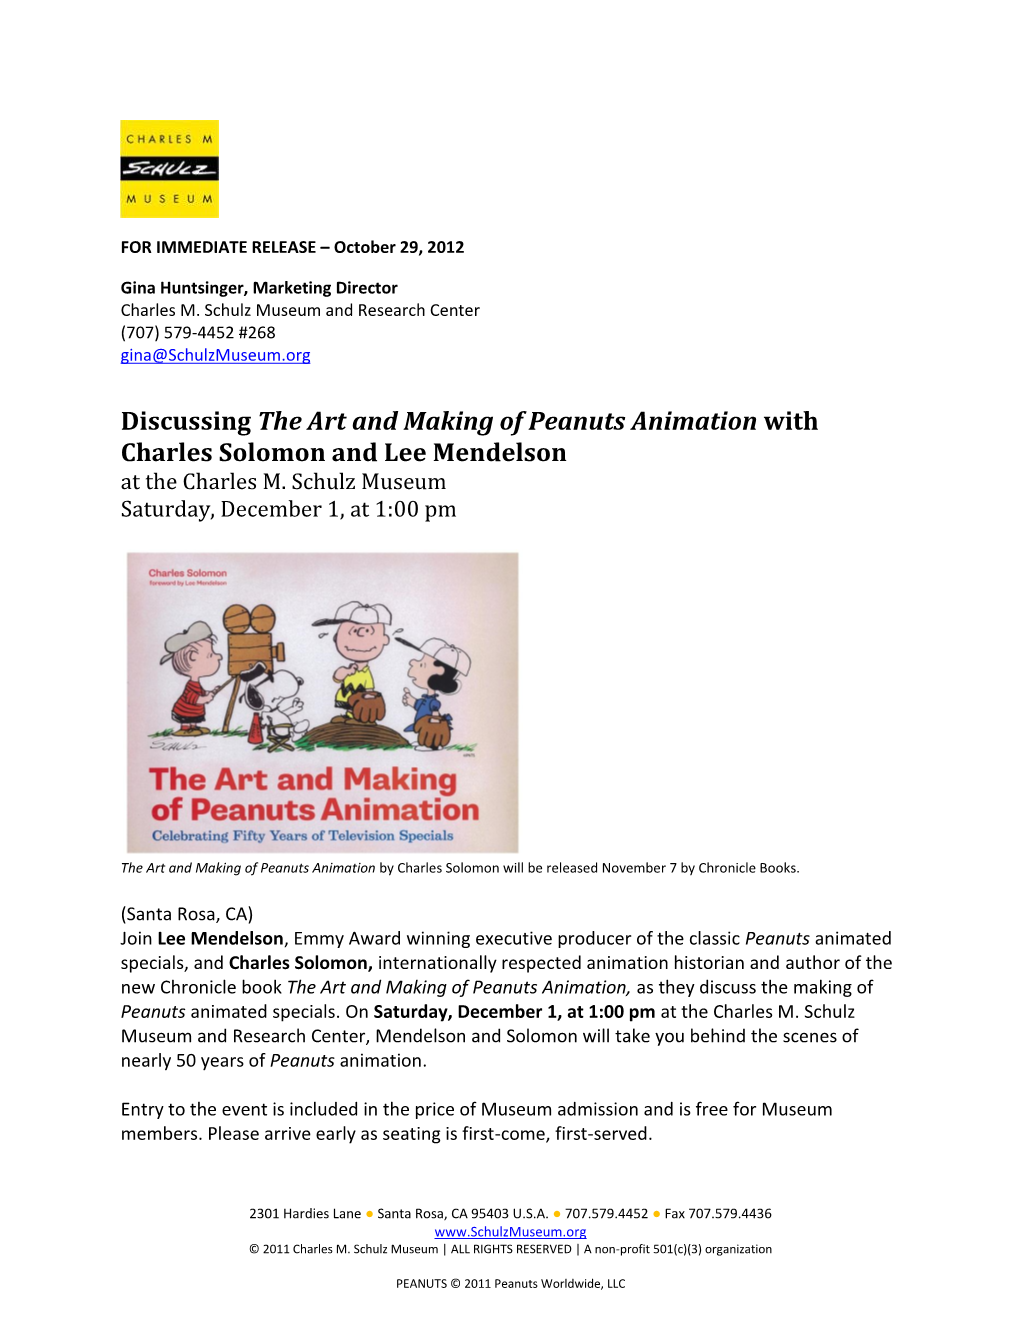 The Art and Making of Peanuts Animation with Charles Solomon and Lee Mendelson at the Charles M